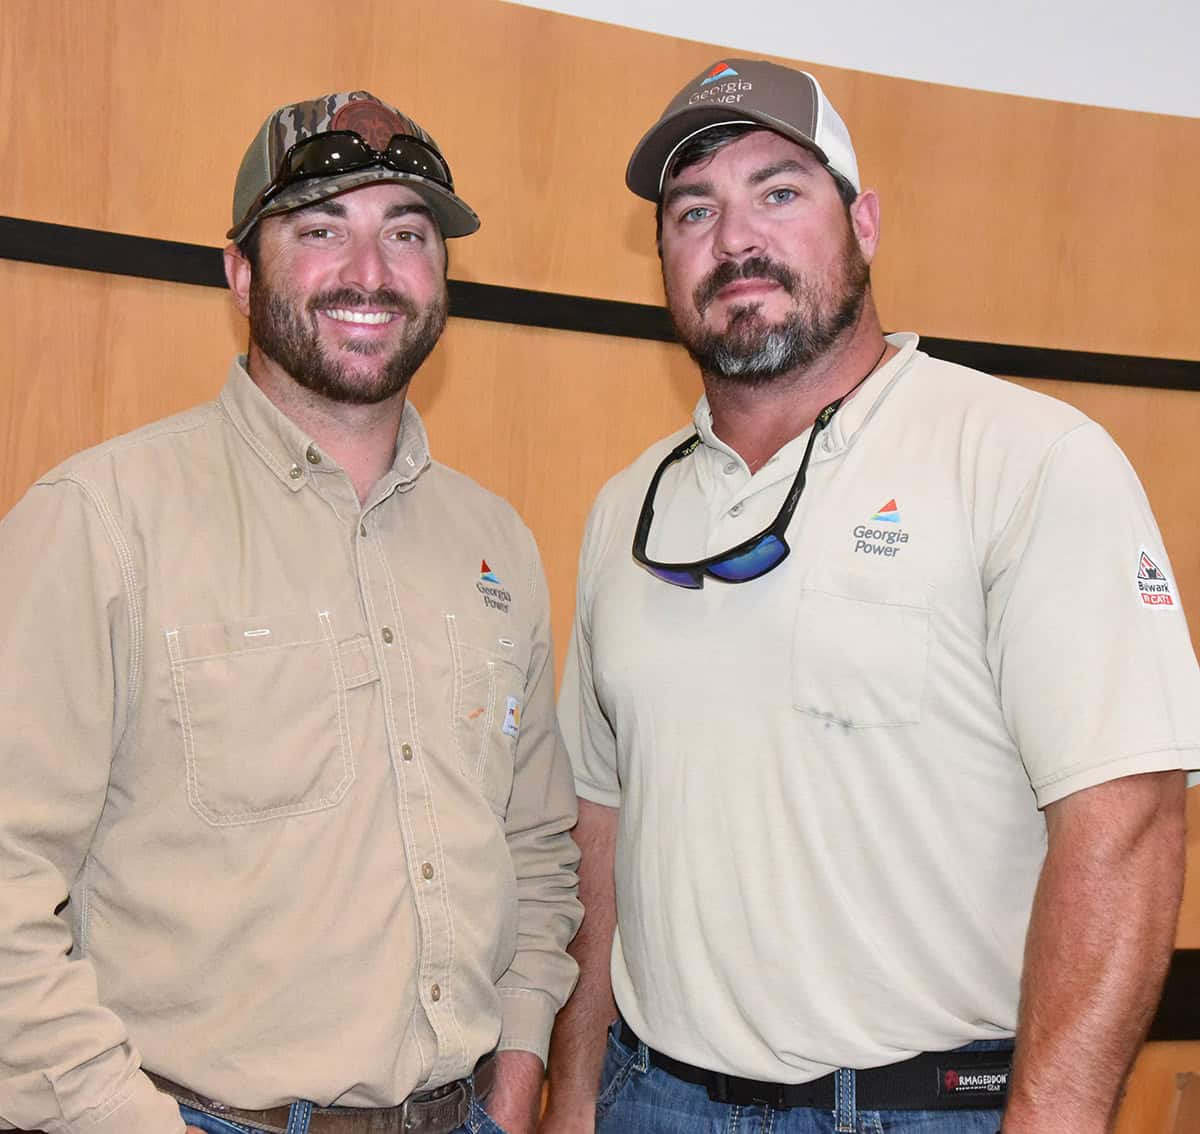 Shown above are SGTC Electrical Lineworker graduates Justin Barnes and Ryan Brown.